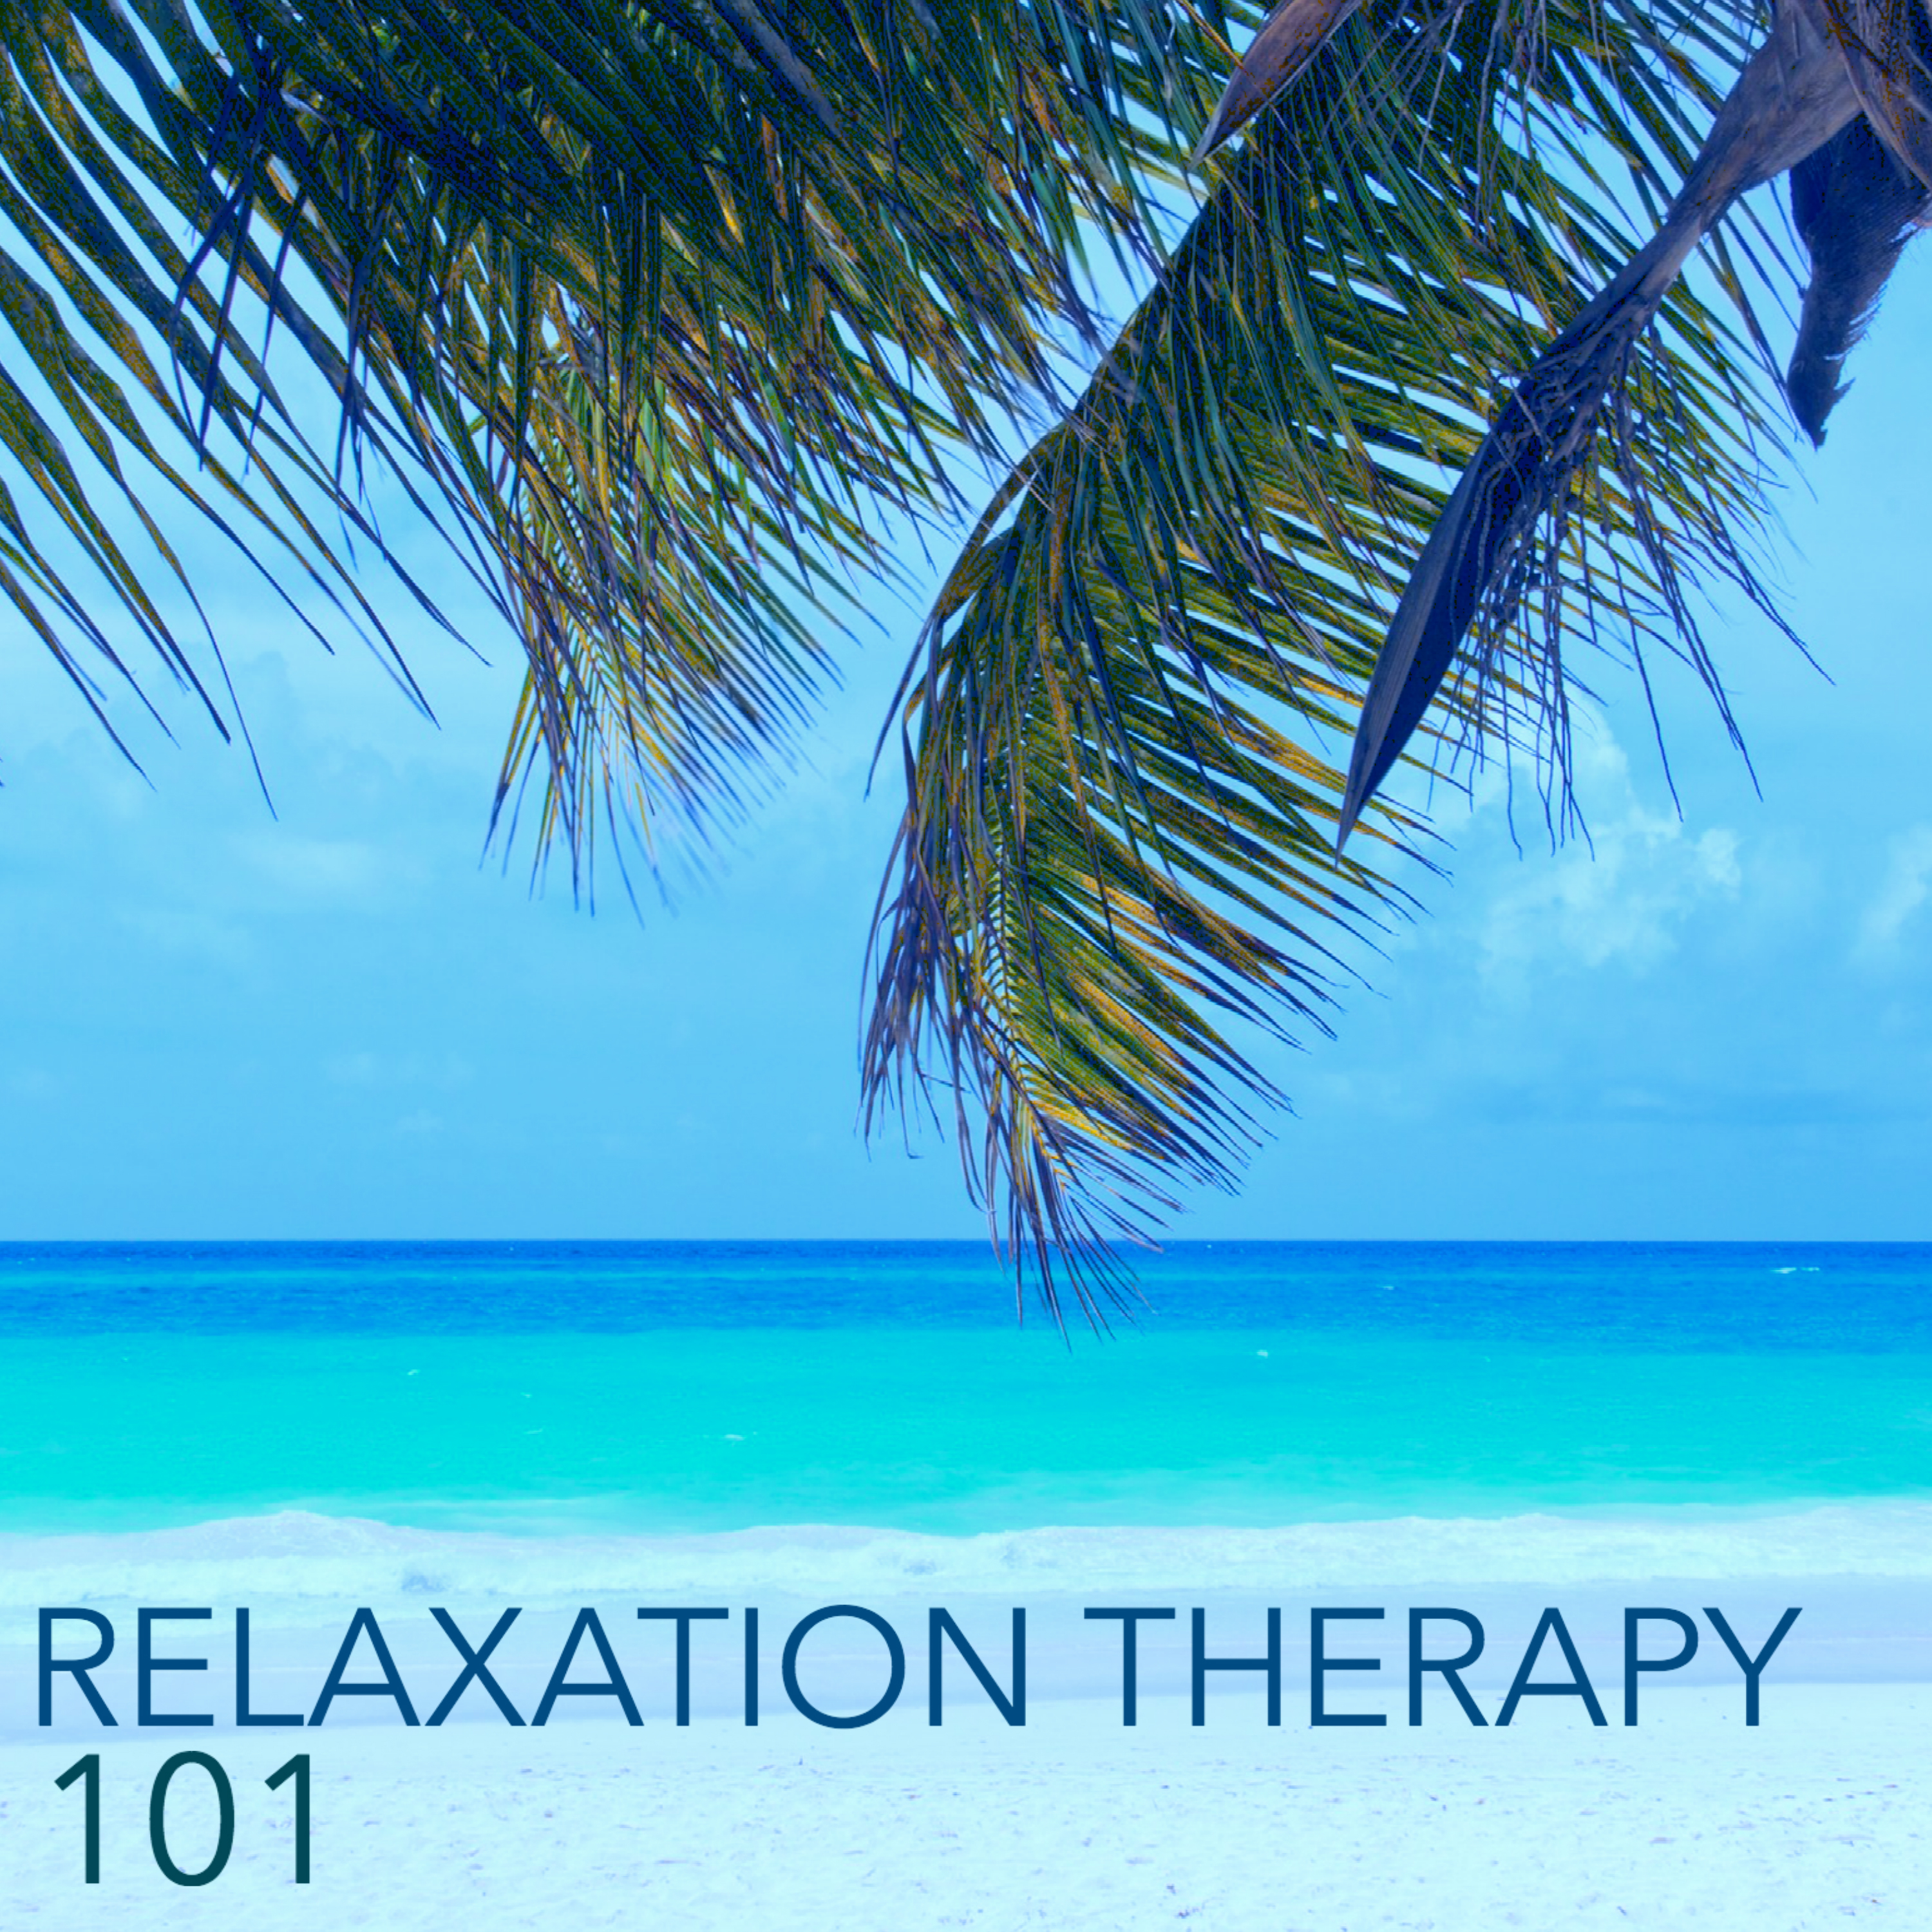 Relaxation Therapy 101 - Divine Spirit of Harmony, Oasis of Meditation for Spirituality